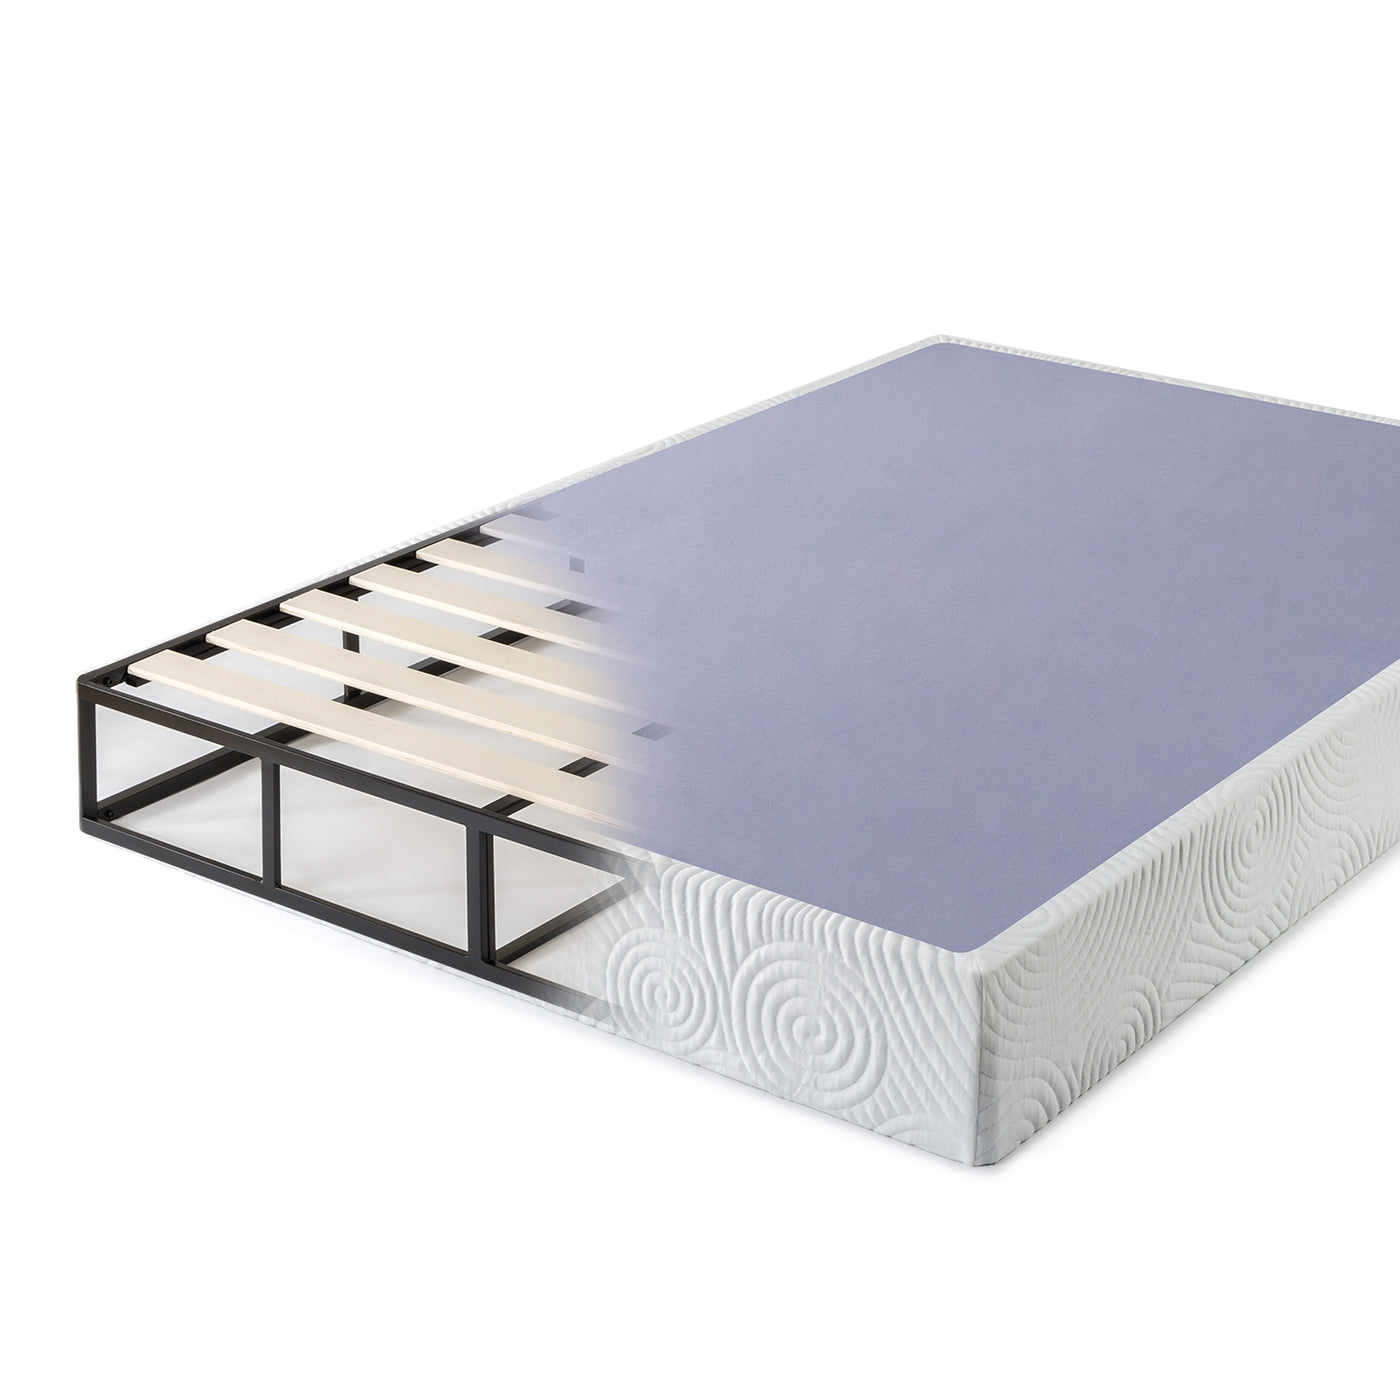 ZINUS Metal Box Spring with Wood Slats /9 Inch Mattress Foundation / Sturdy Steel Structure / Easy Assembly, Twin - $35